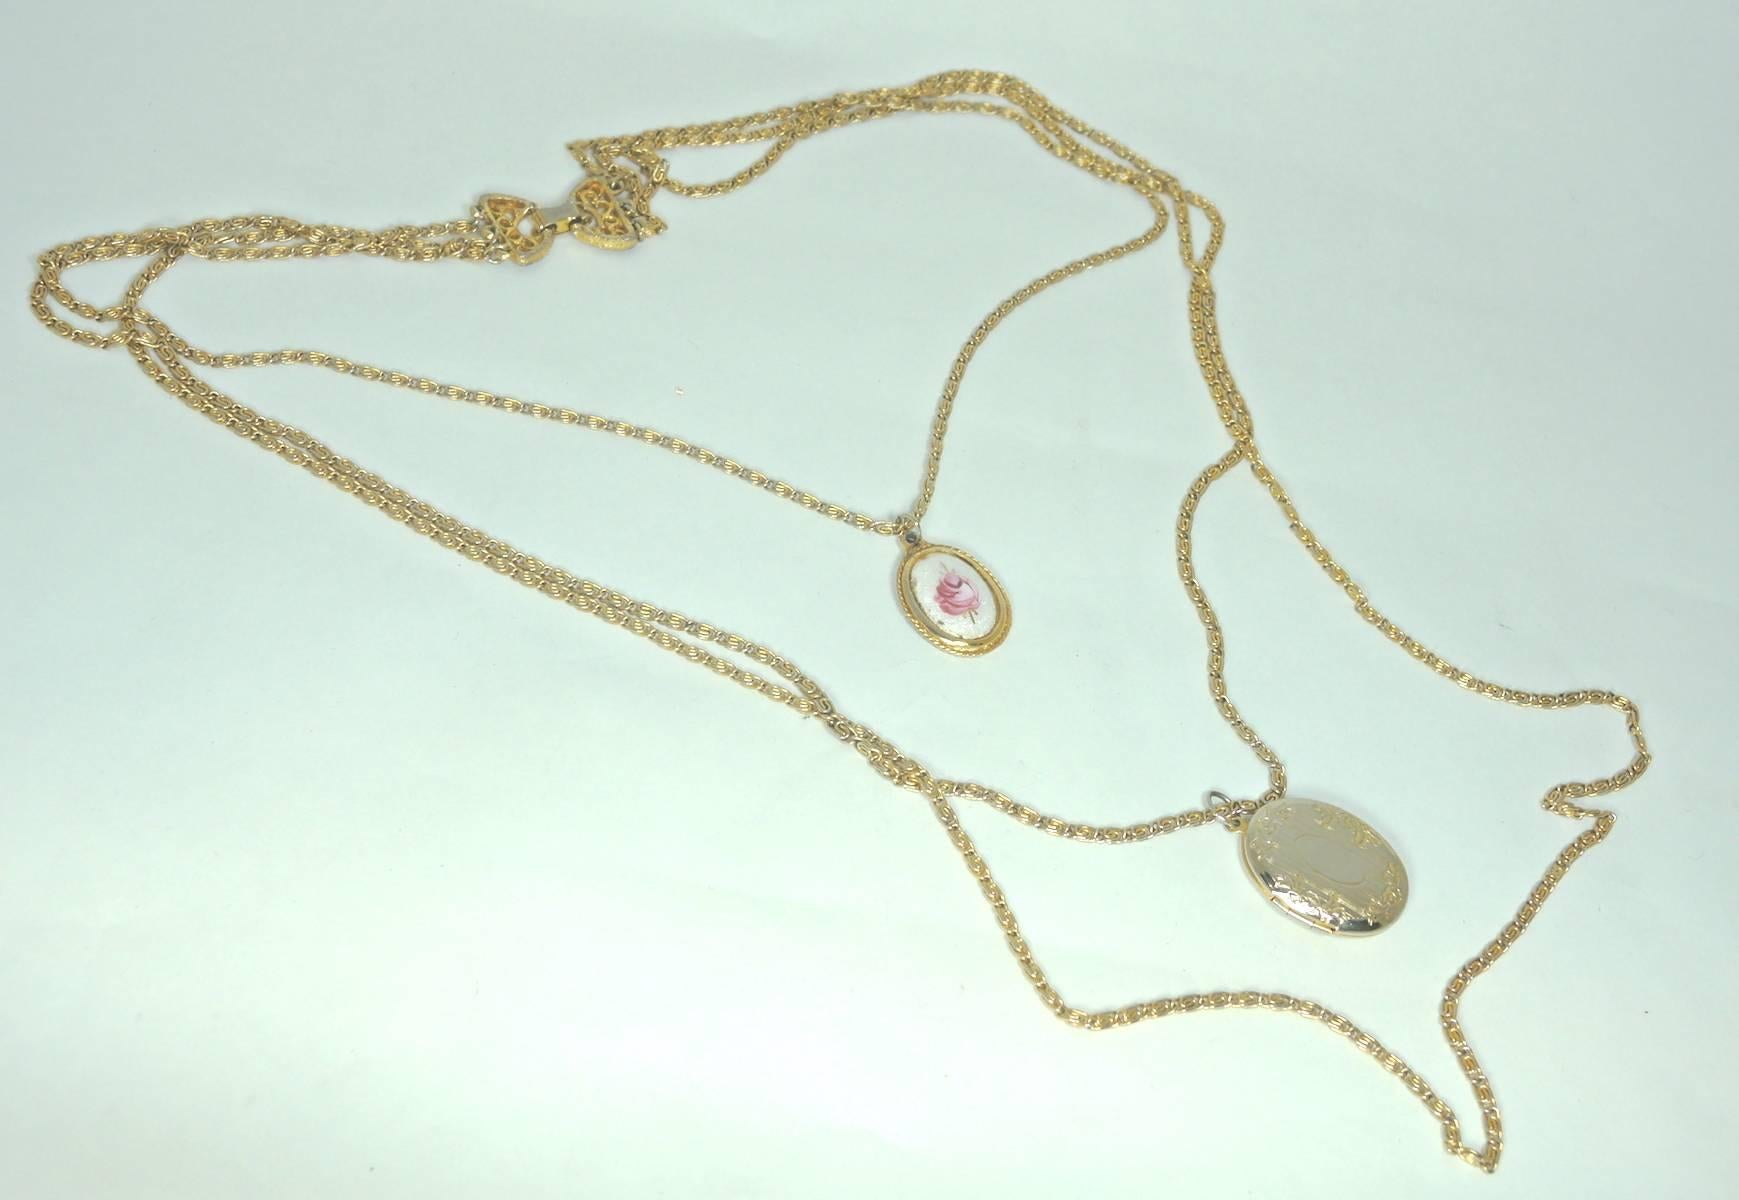 This Goldette necklace features three chains with the longest measuring 34”. The second to longest has a locket and measures 26”. The shortest chain has a small single pink rose enamel pendant that measures 20”. This necklace was designed in a gold